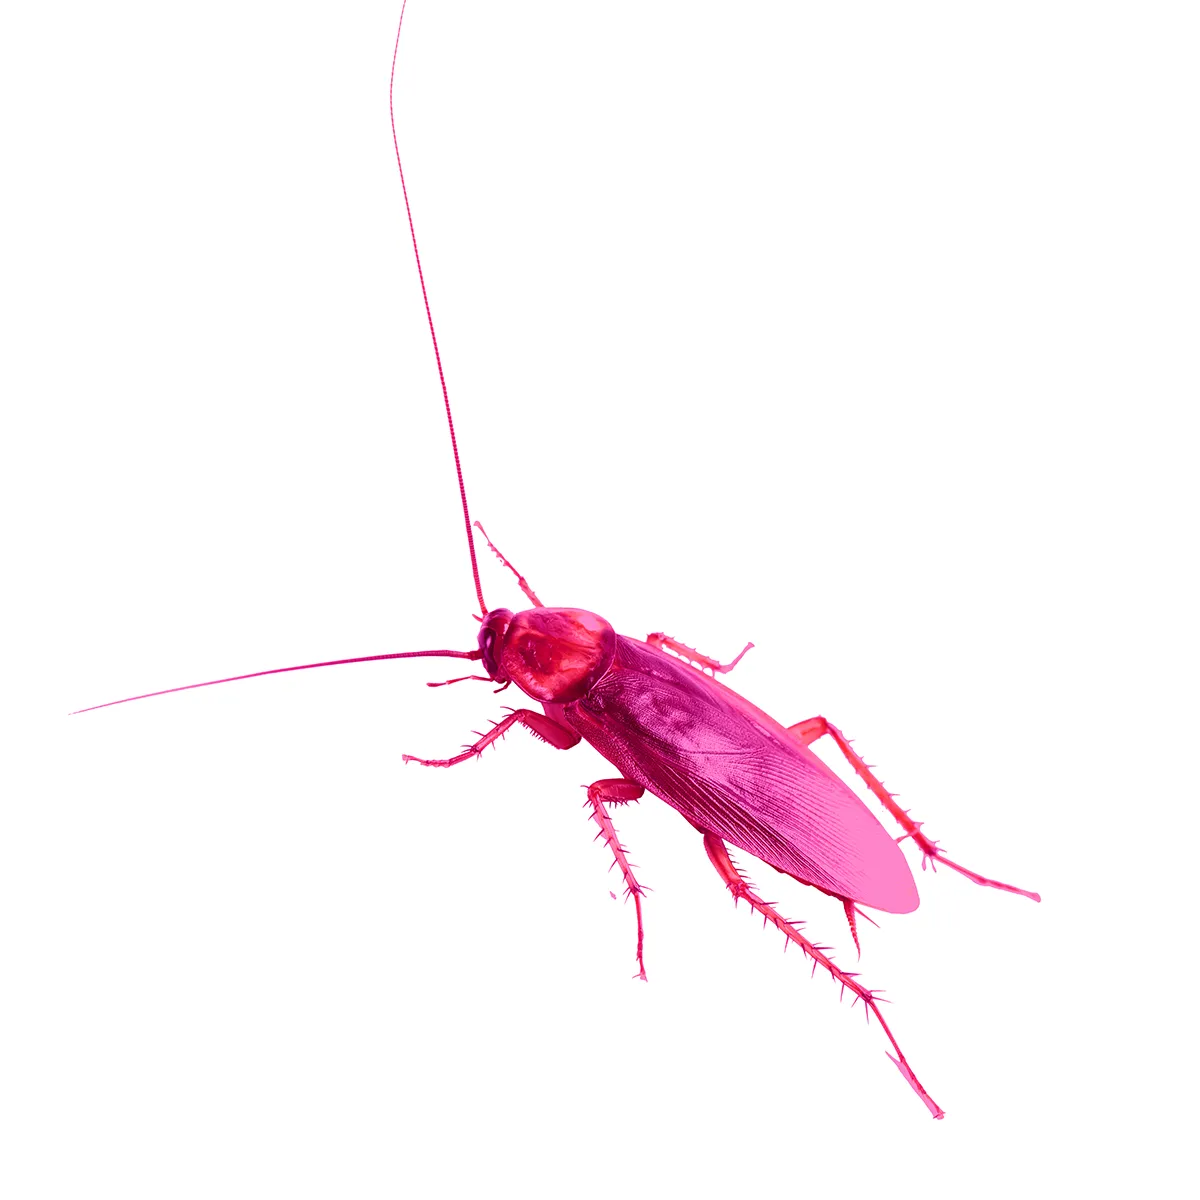 Print from contemporary artist Vladimir Tsesler - Pink Plastic Cockroach. For sale.